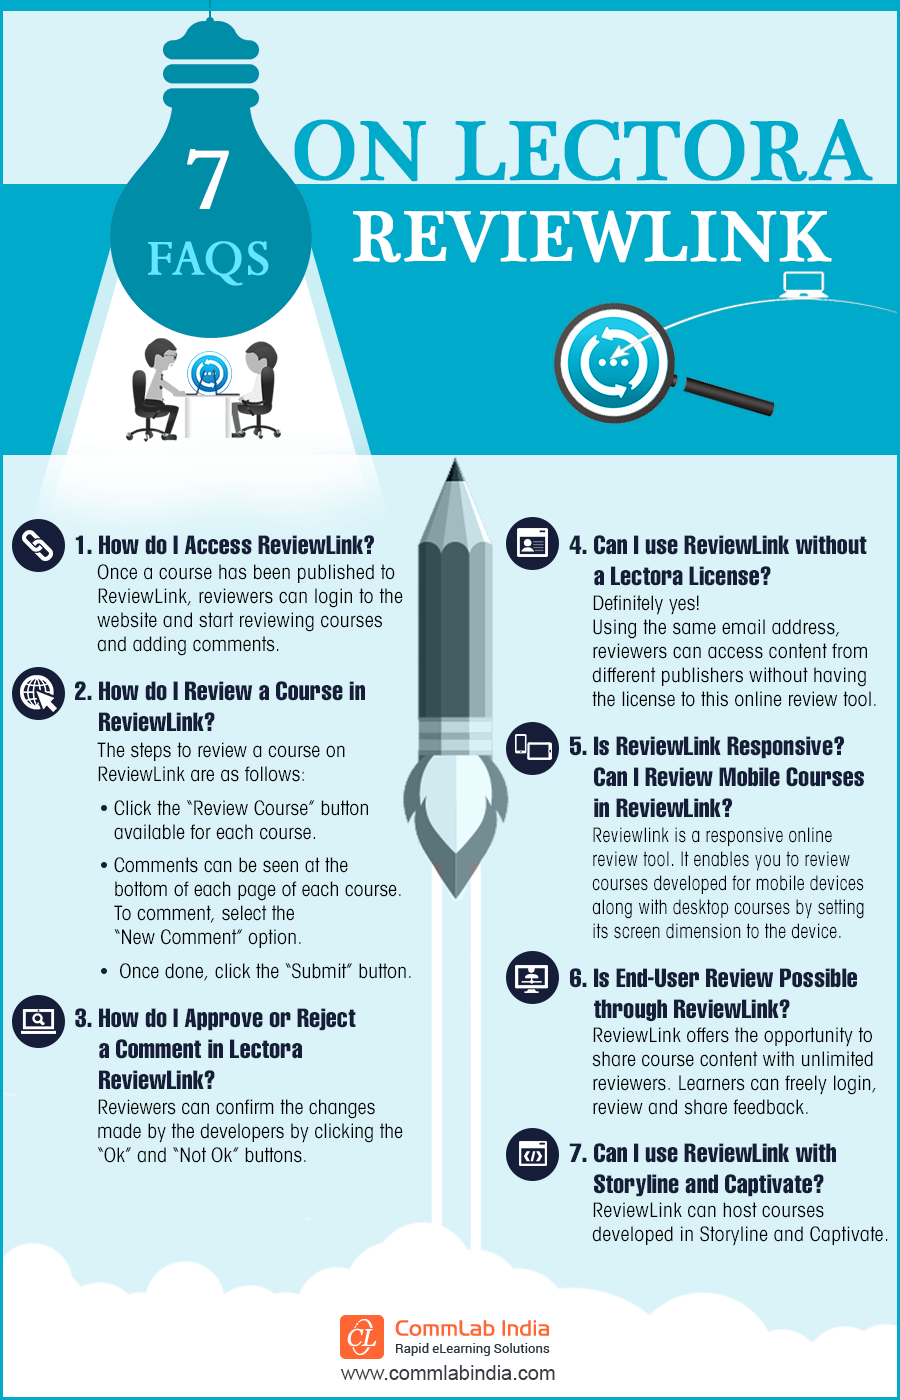 Using Lectora ReviewLink for eLearning Development: 7 FAQs Answered [Infographic]